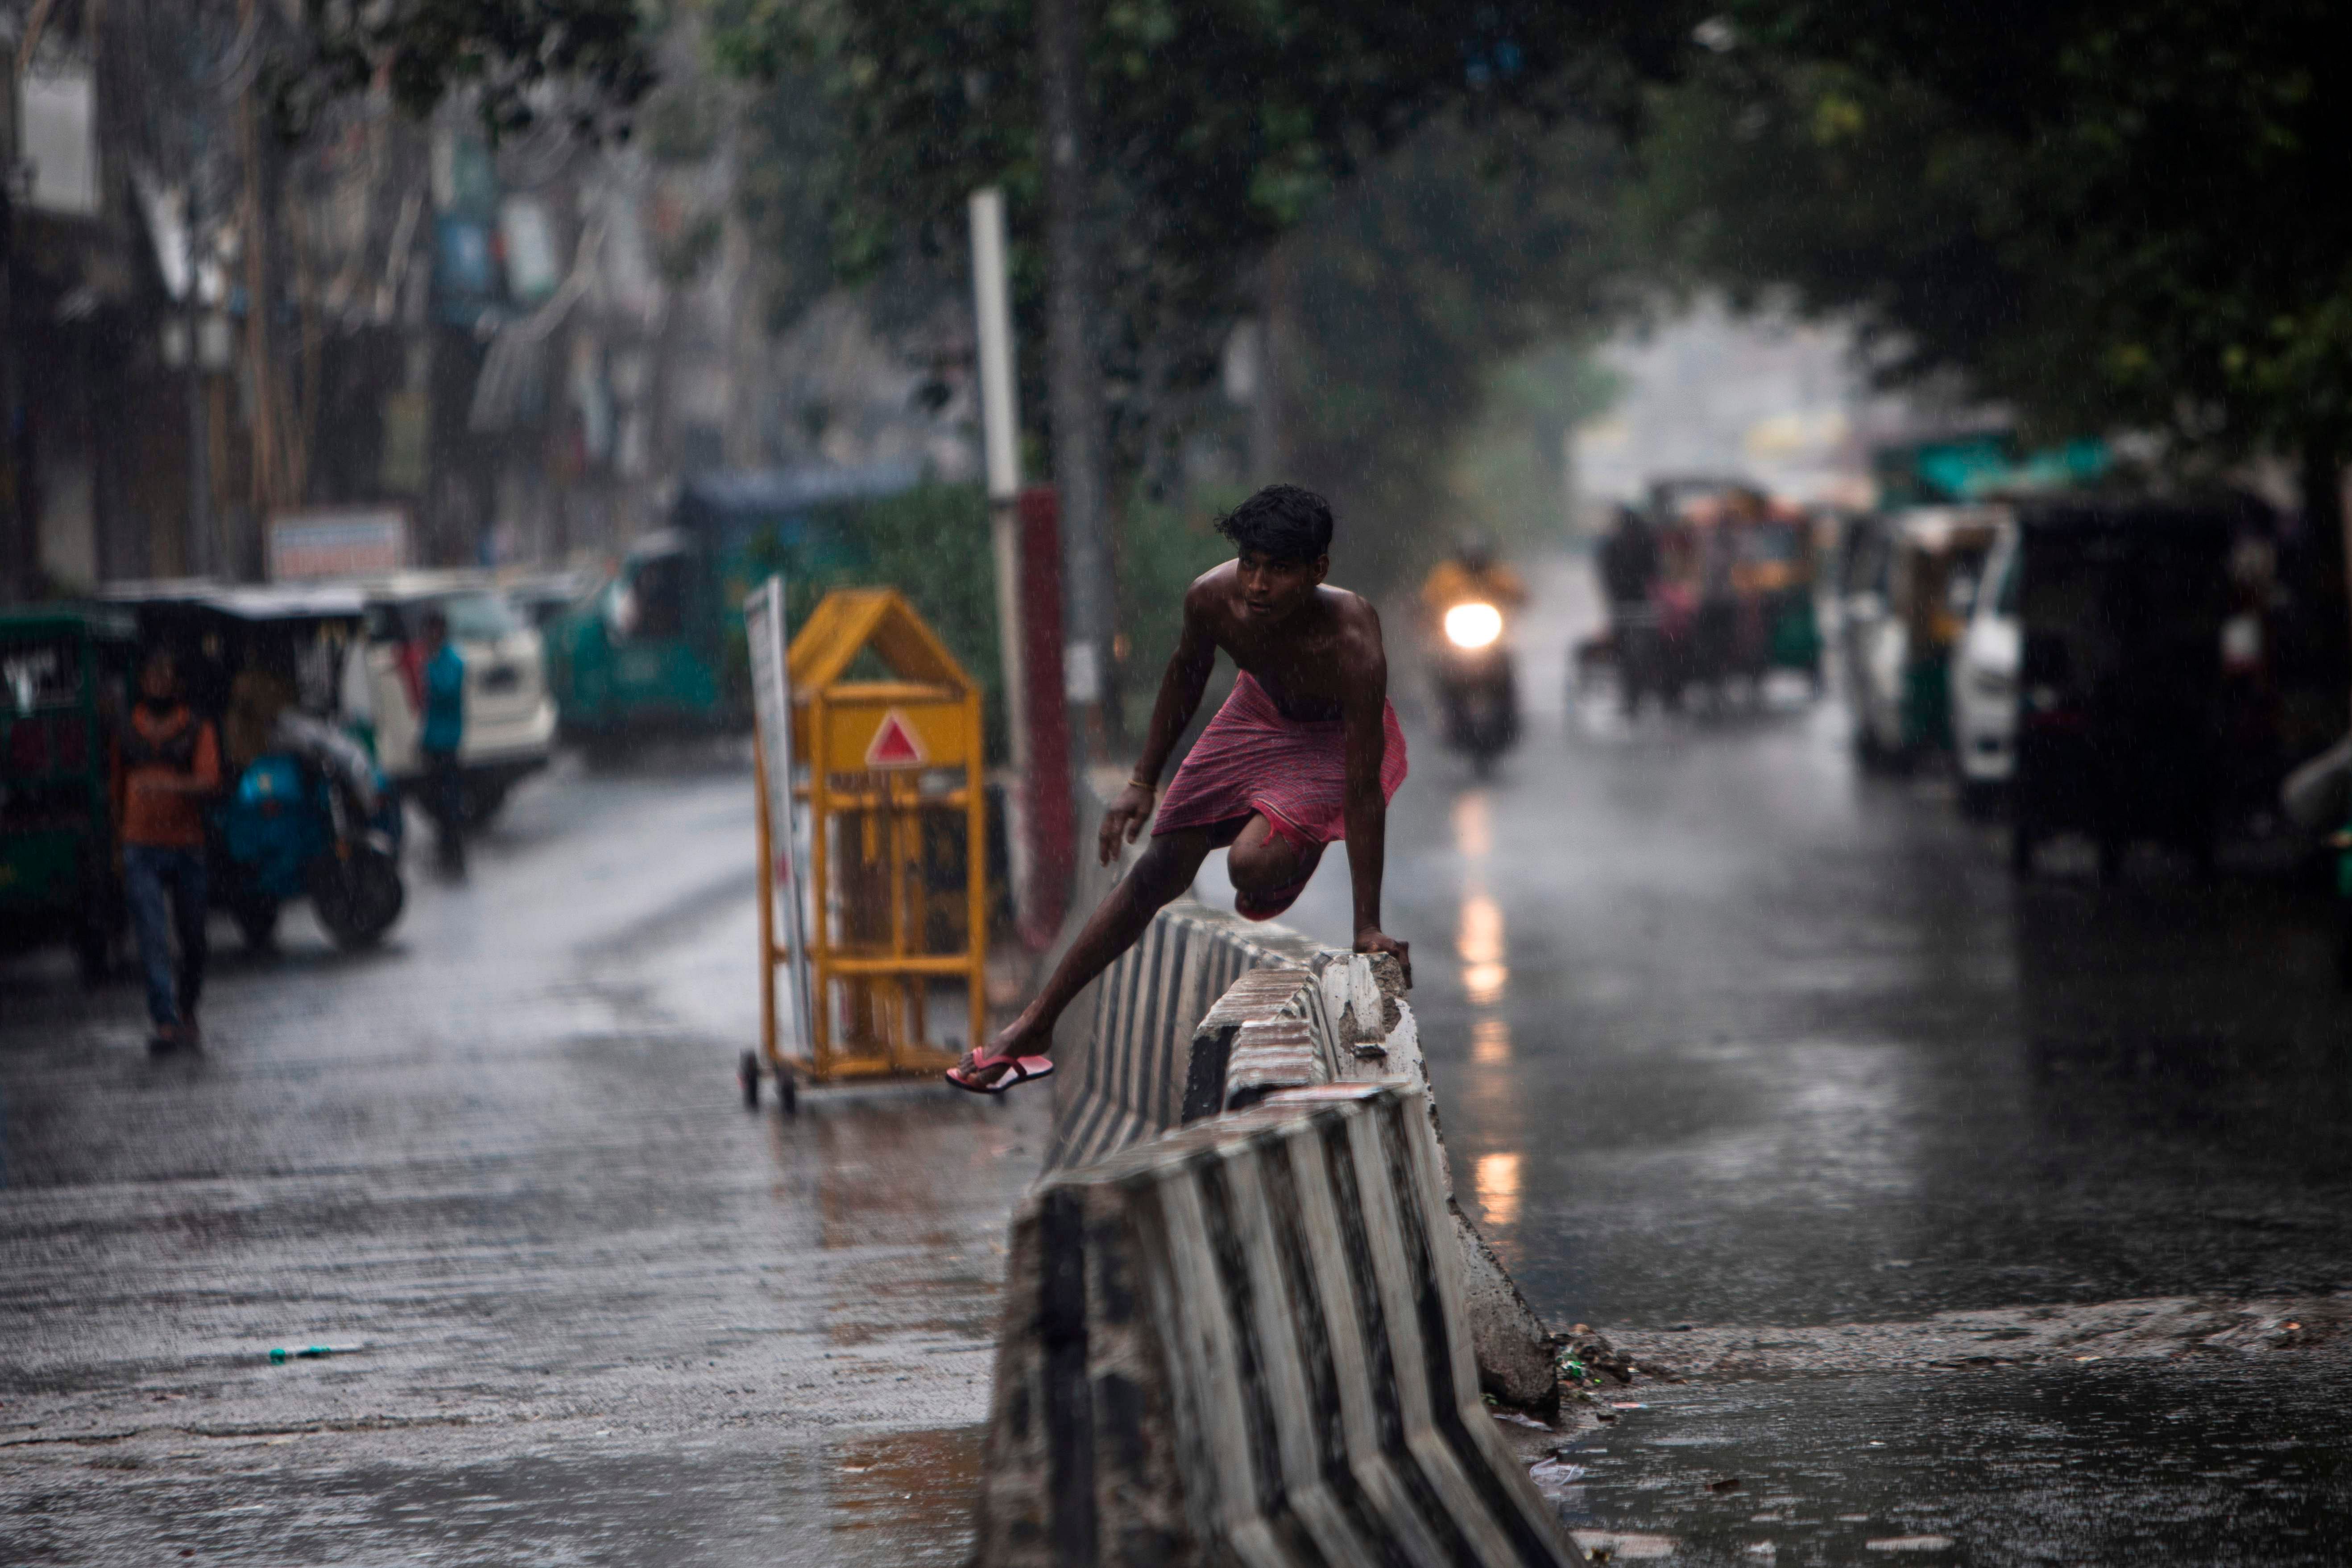 A youth jumps over a concrete barrier along a street during a monsoon rainfall in New Delhi. Credits: AFP Photo